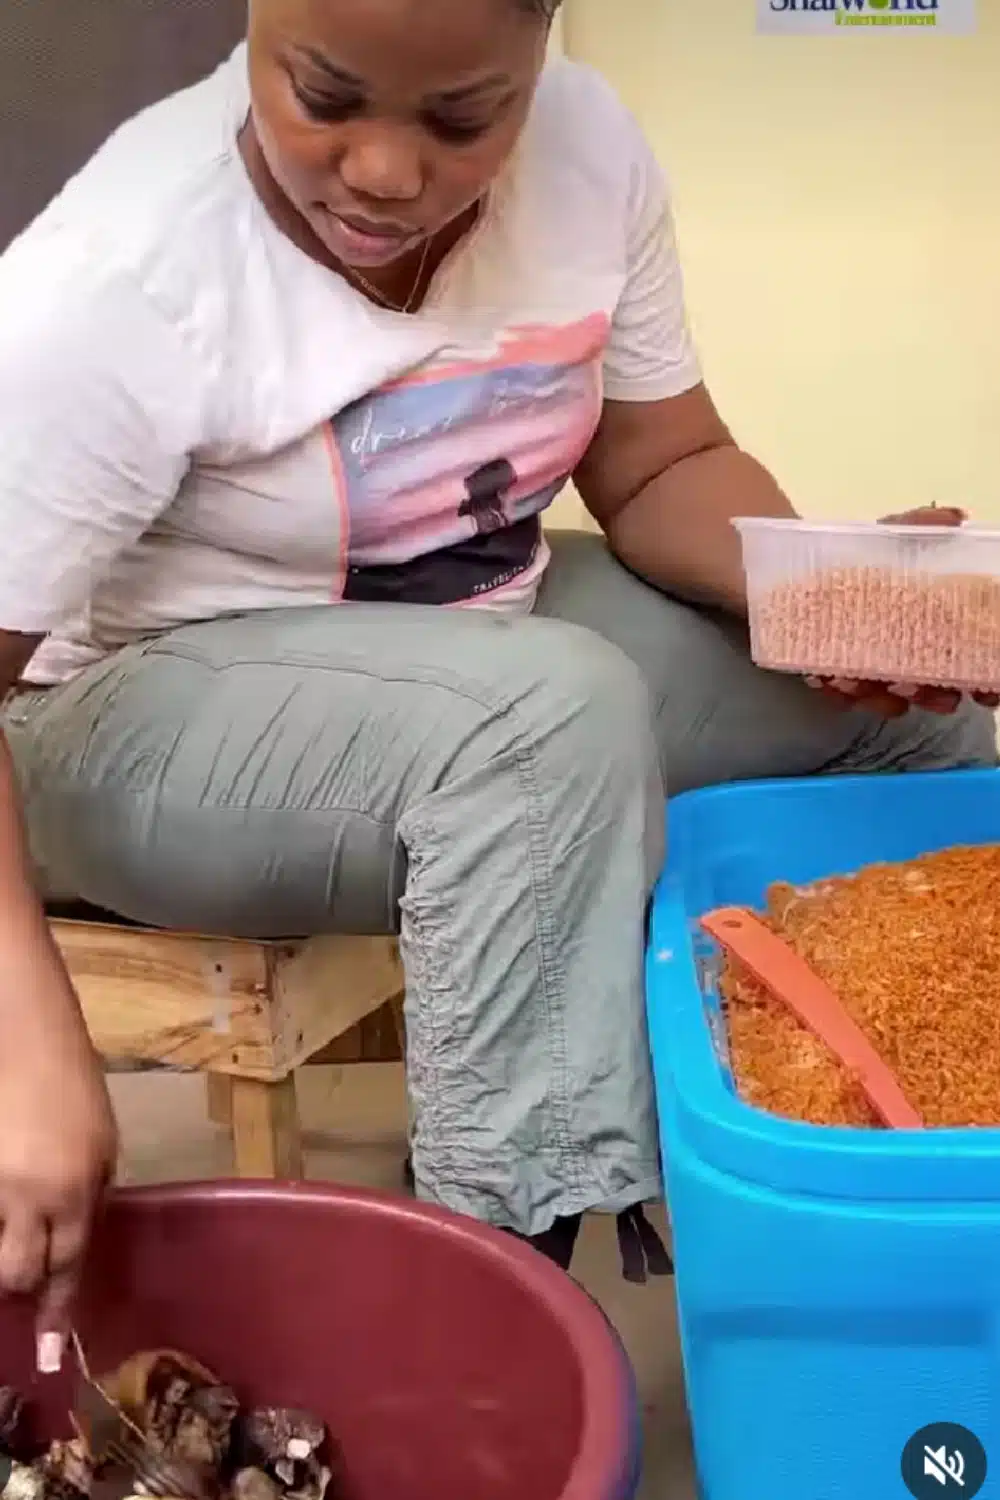 Seyi edun melts hearts as she gifts food to the less privileged. 